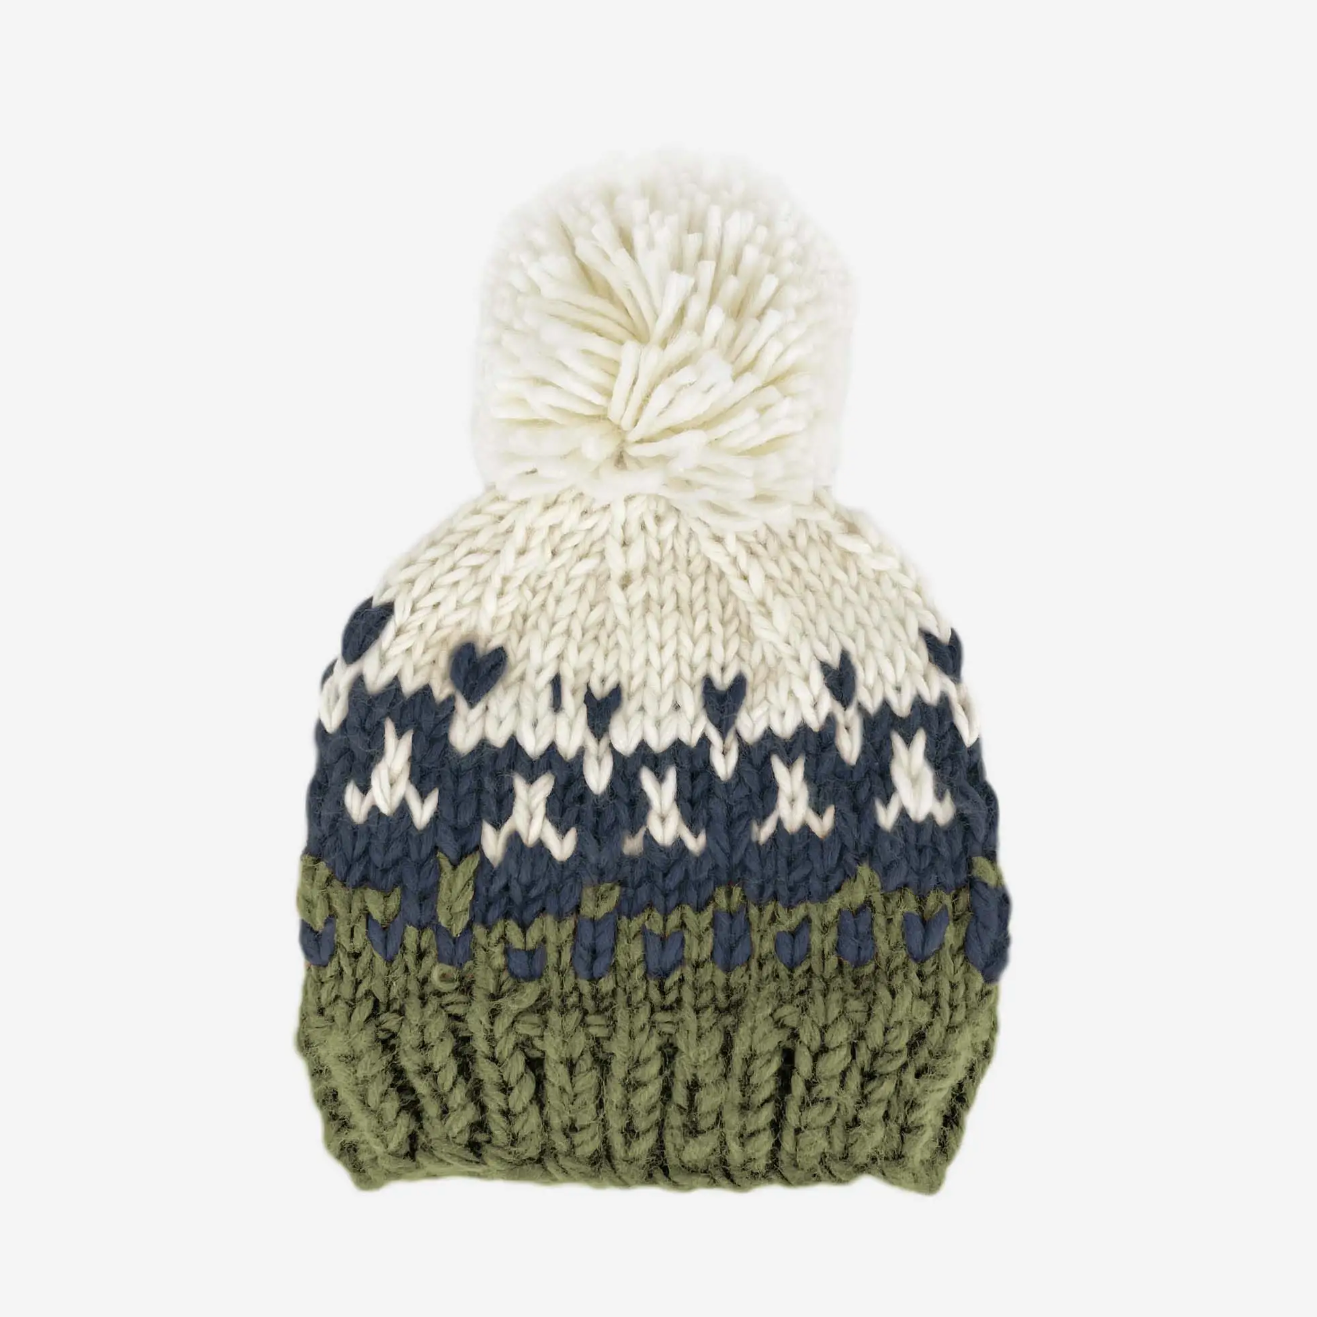 nell stripe hat in navy/olive